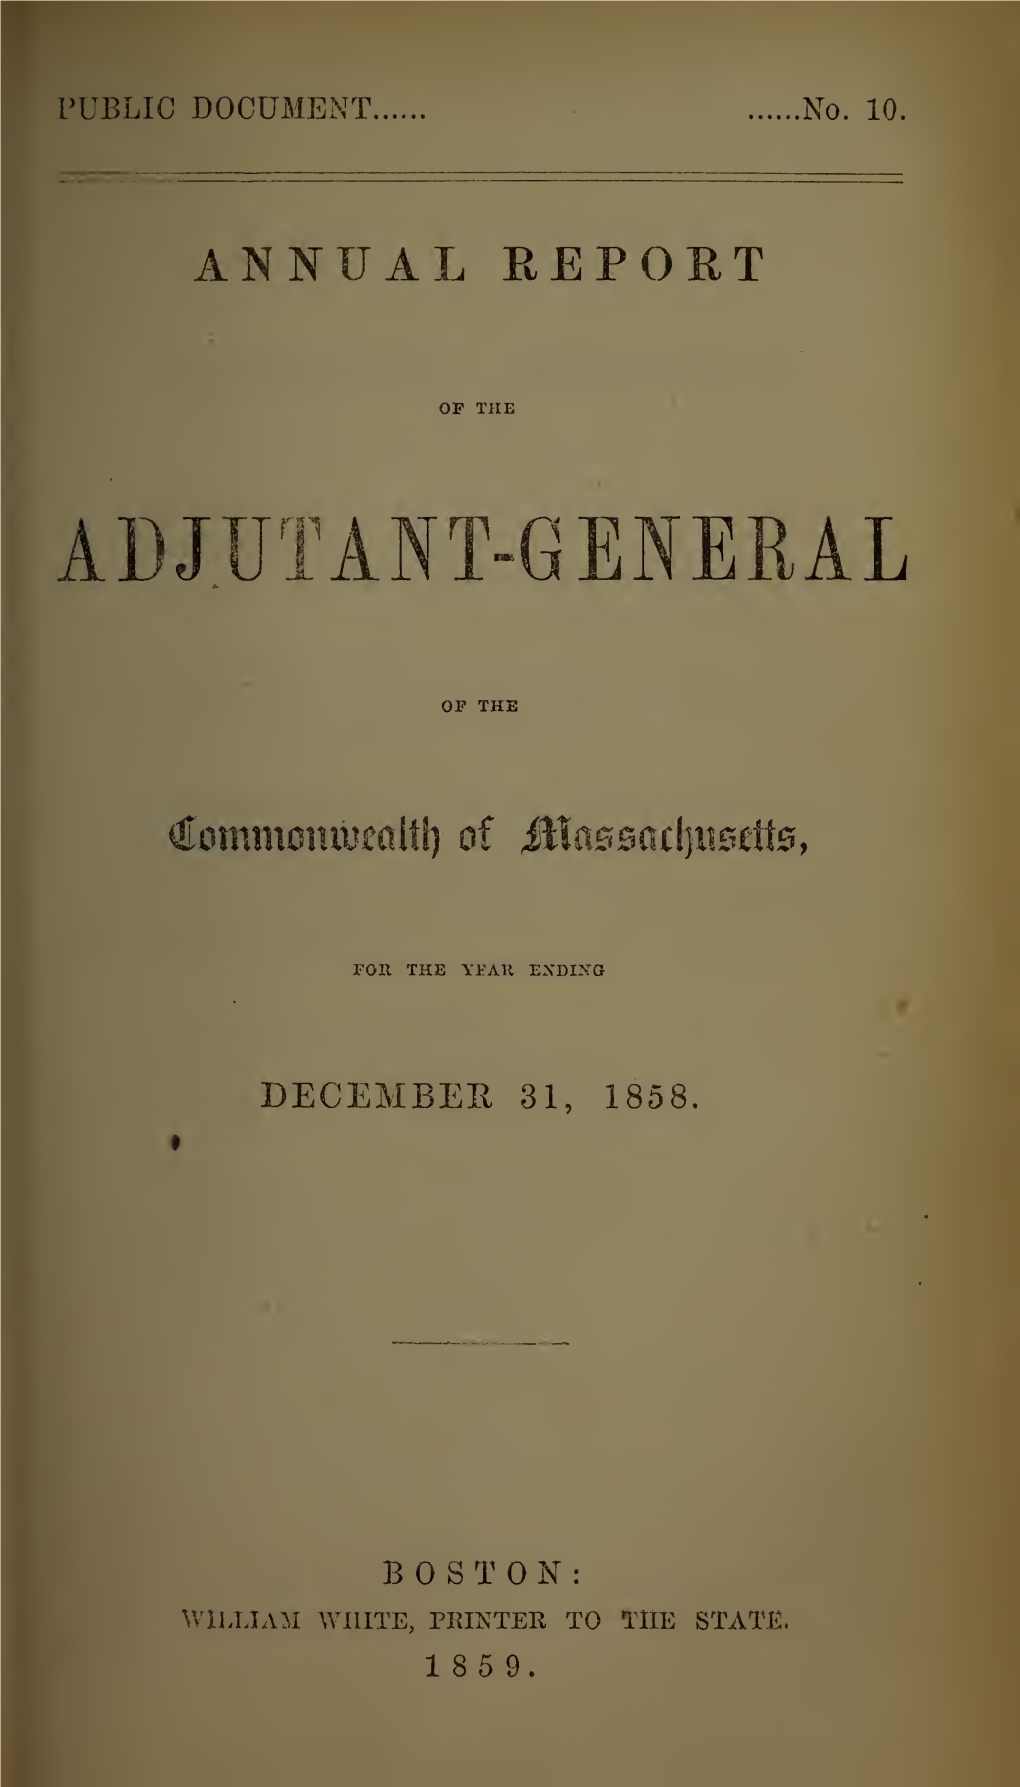 Annual Report of the Adjutant General, 1848-1859